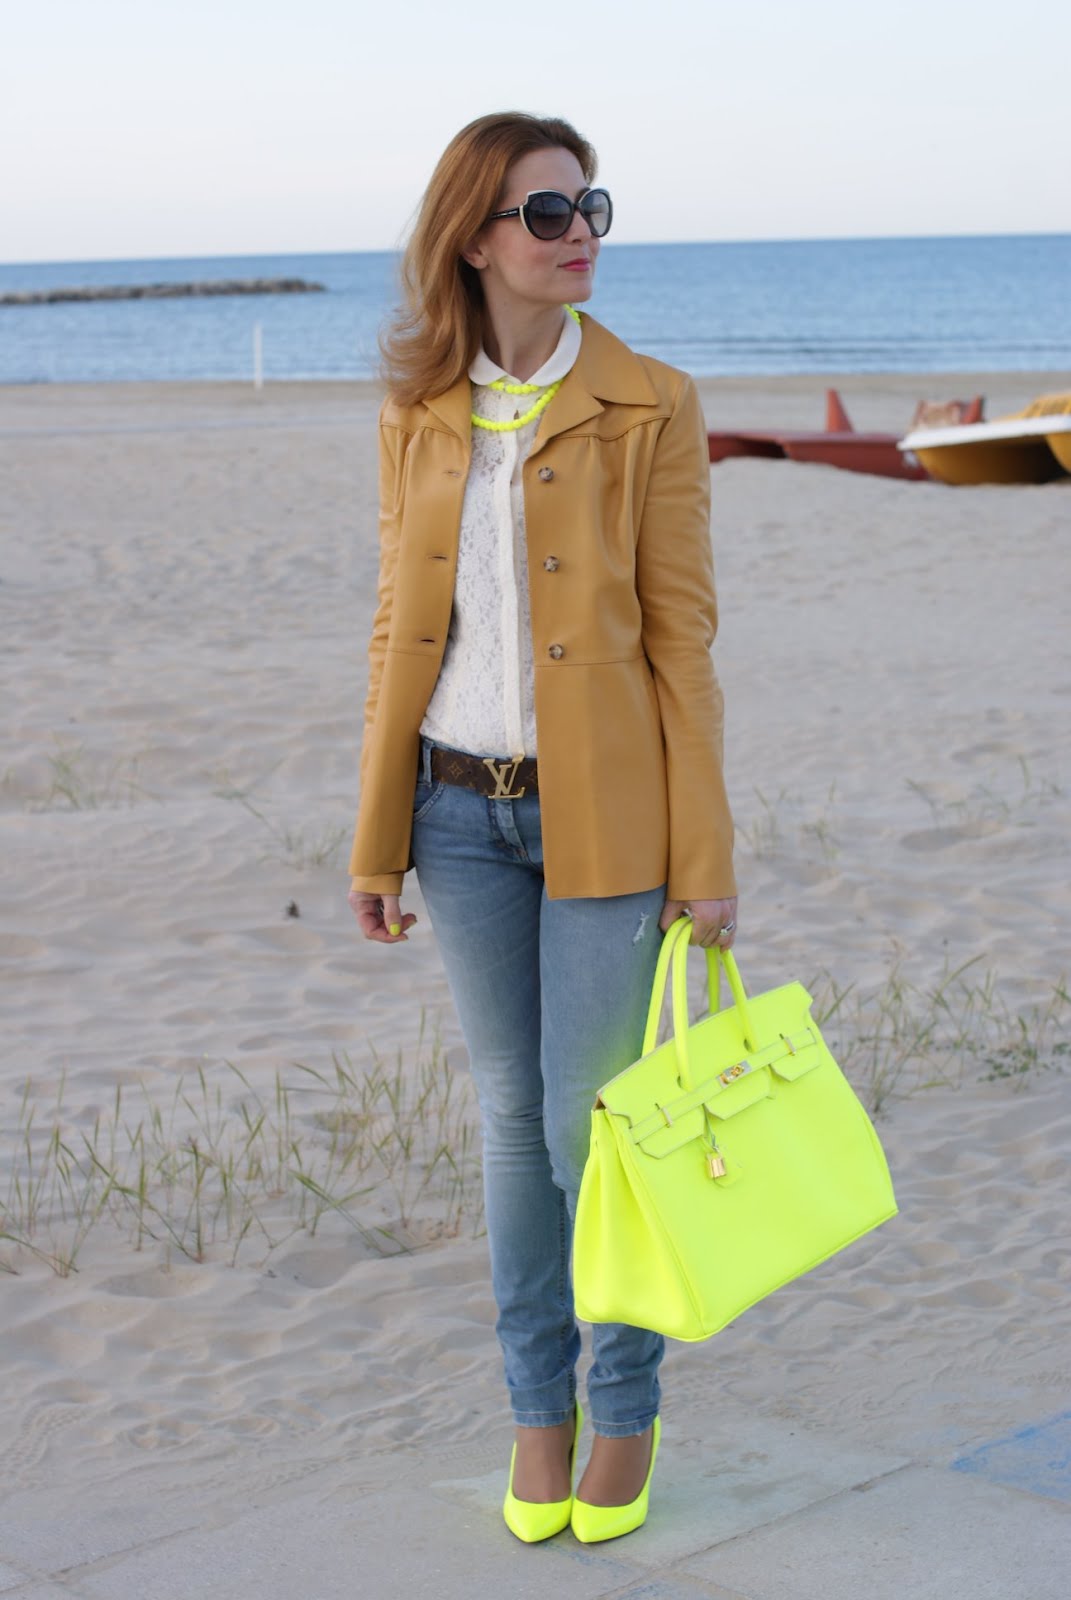 Neon yellow and neutrals | Fashion and Cookies - fashion and beauty blog